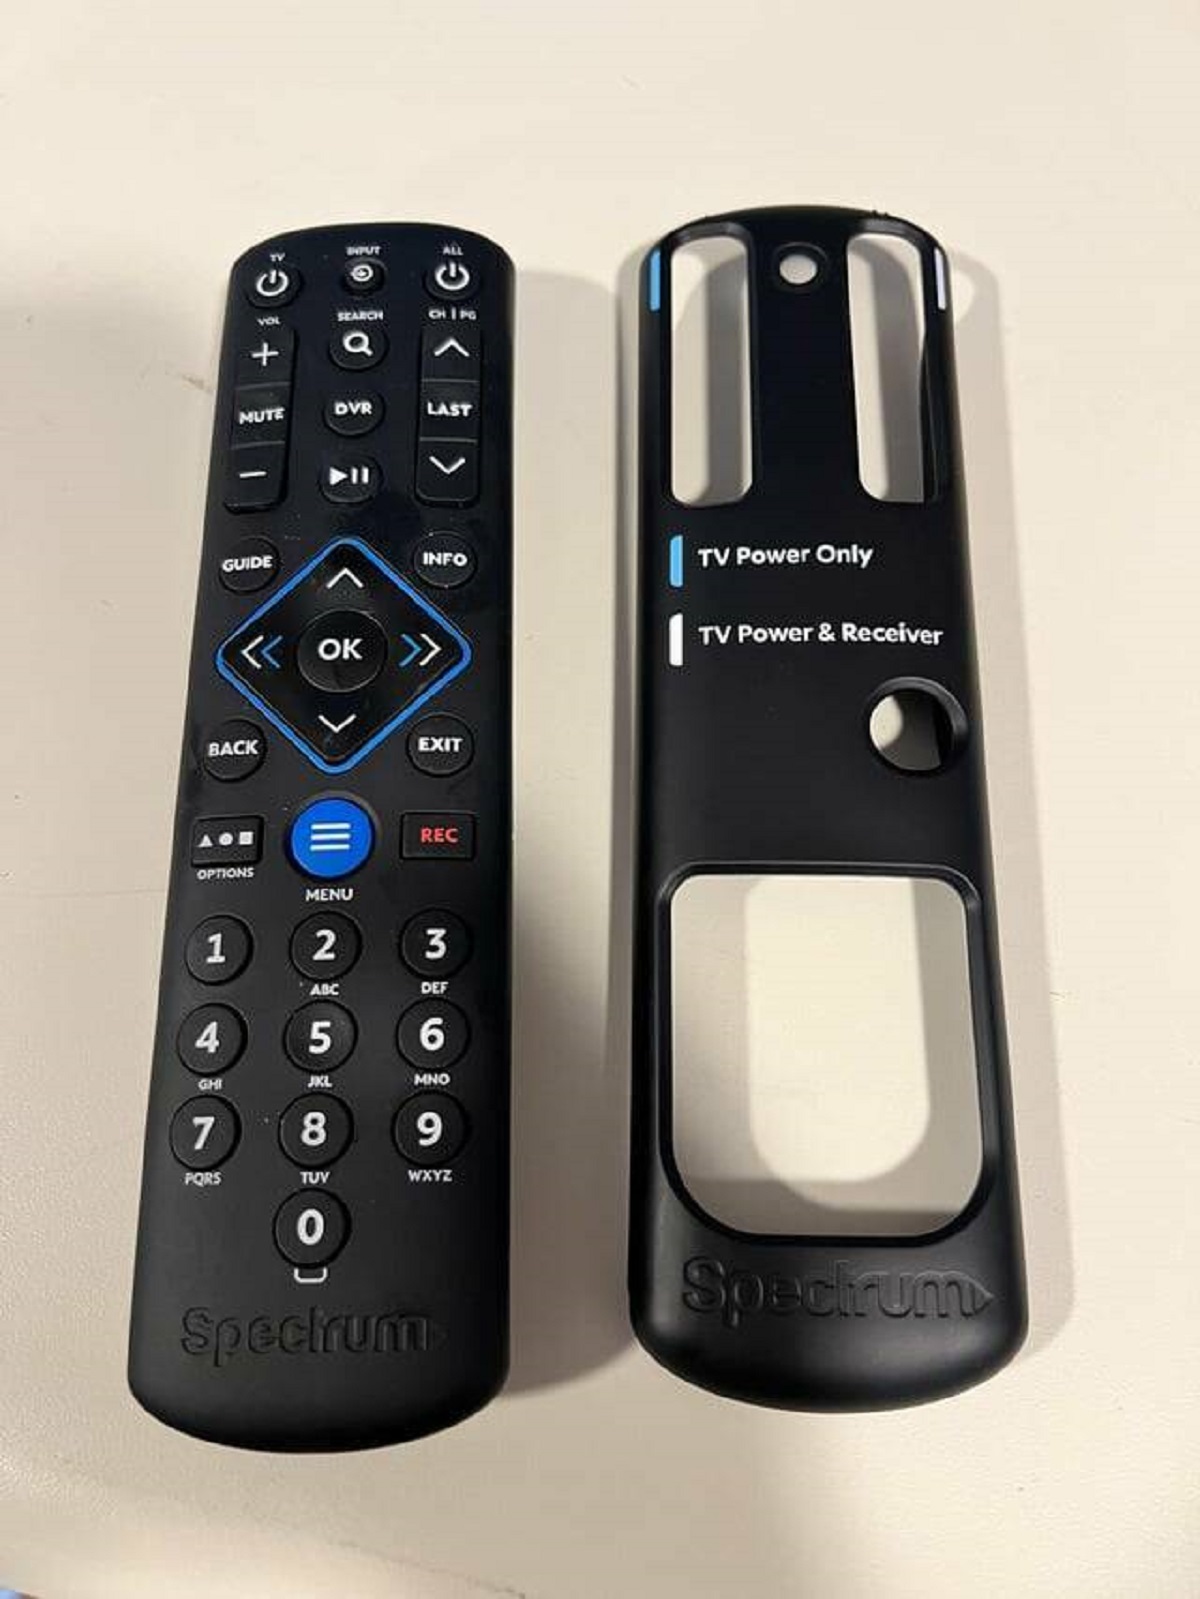 "The new cable remotes come with a cover to simplify the remote."